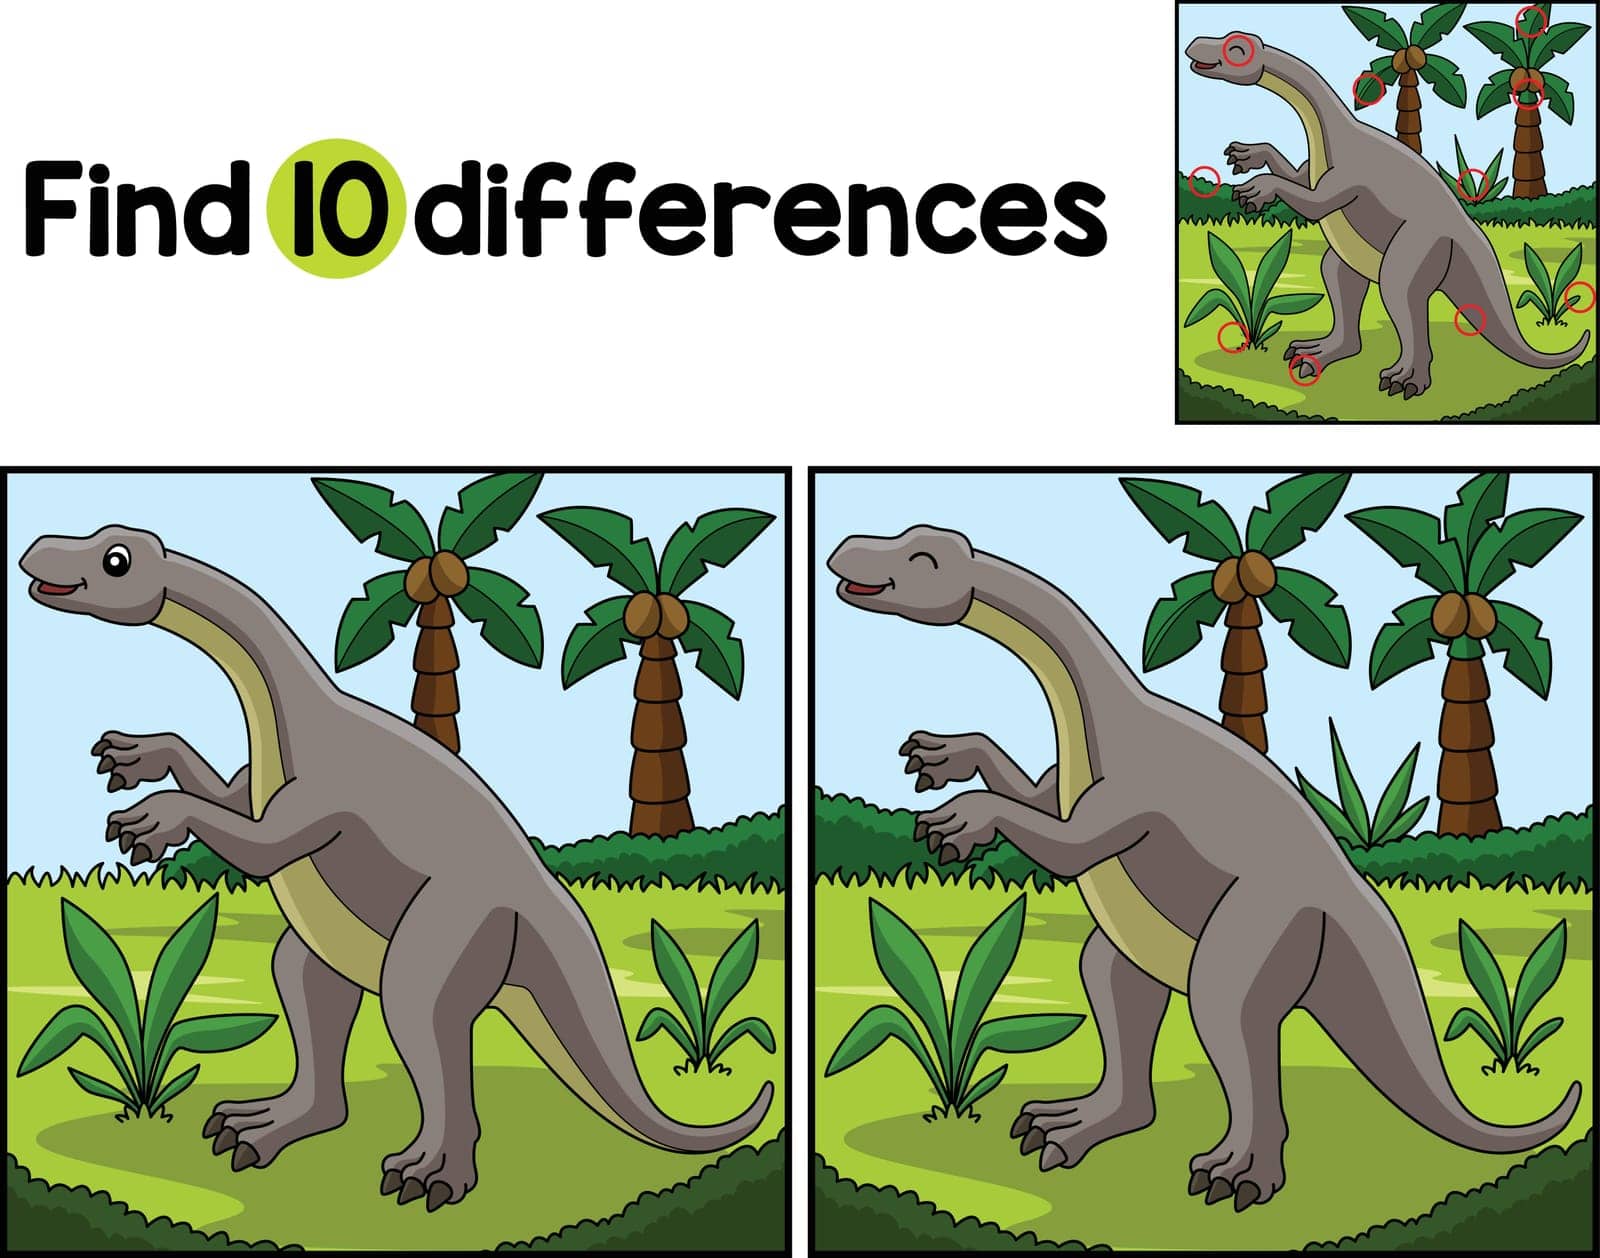 Lufengosaurus Dinosaur Find The Differences by abbydesign